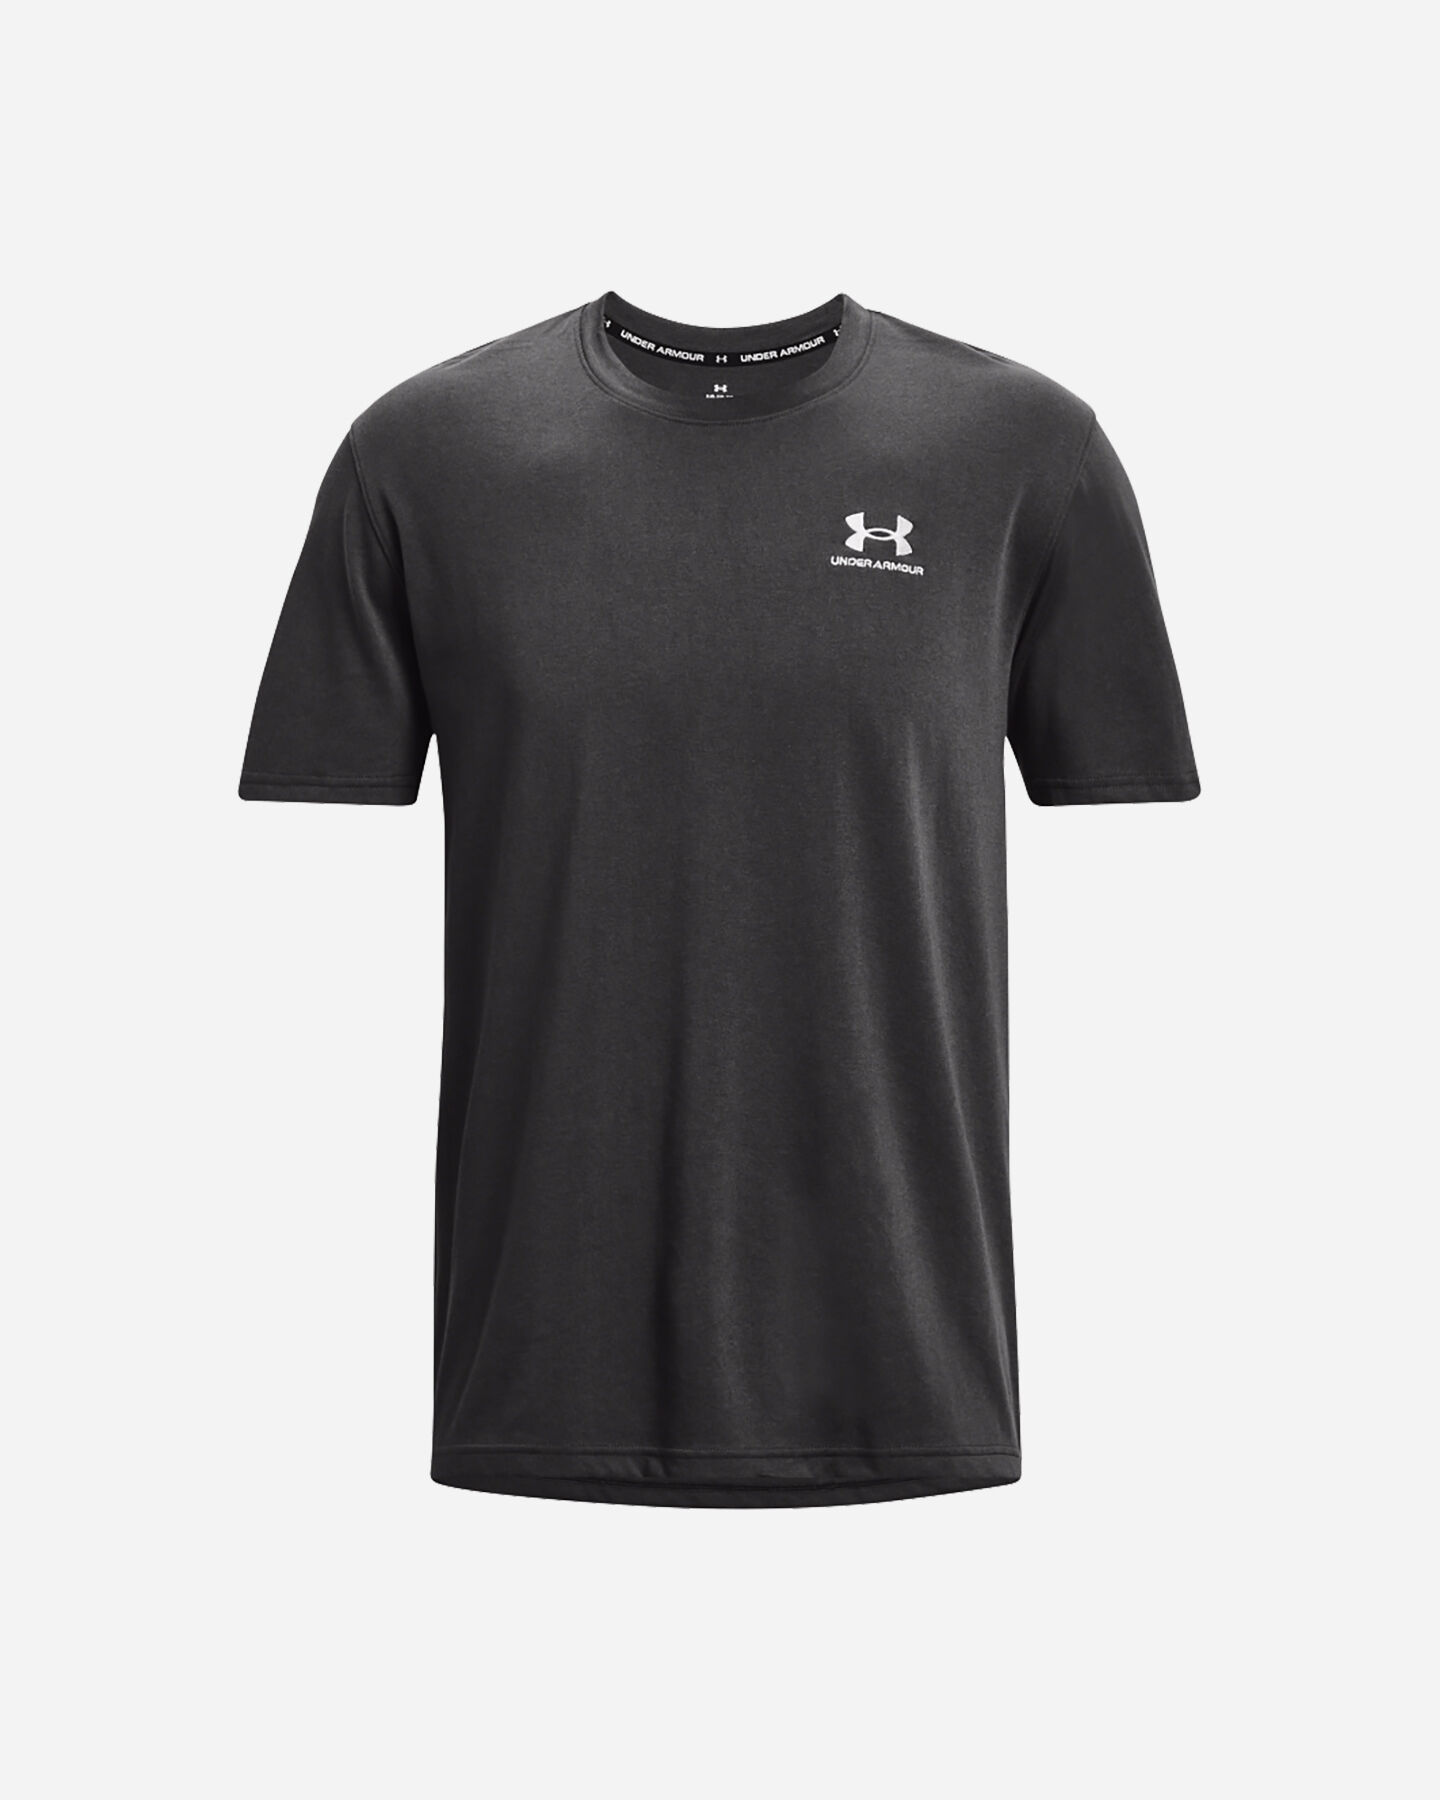  T-Shirt UNDER ARMOUR LOGO EMB HEAVYWEIGHT M S5459433|0010|XS scatto 0